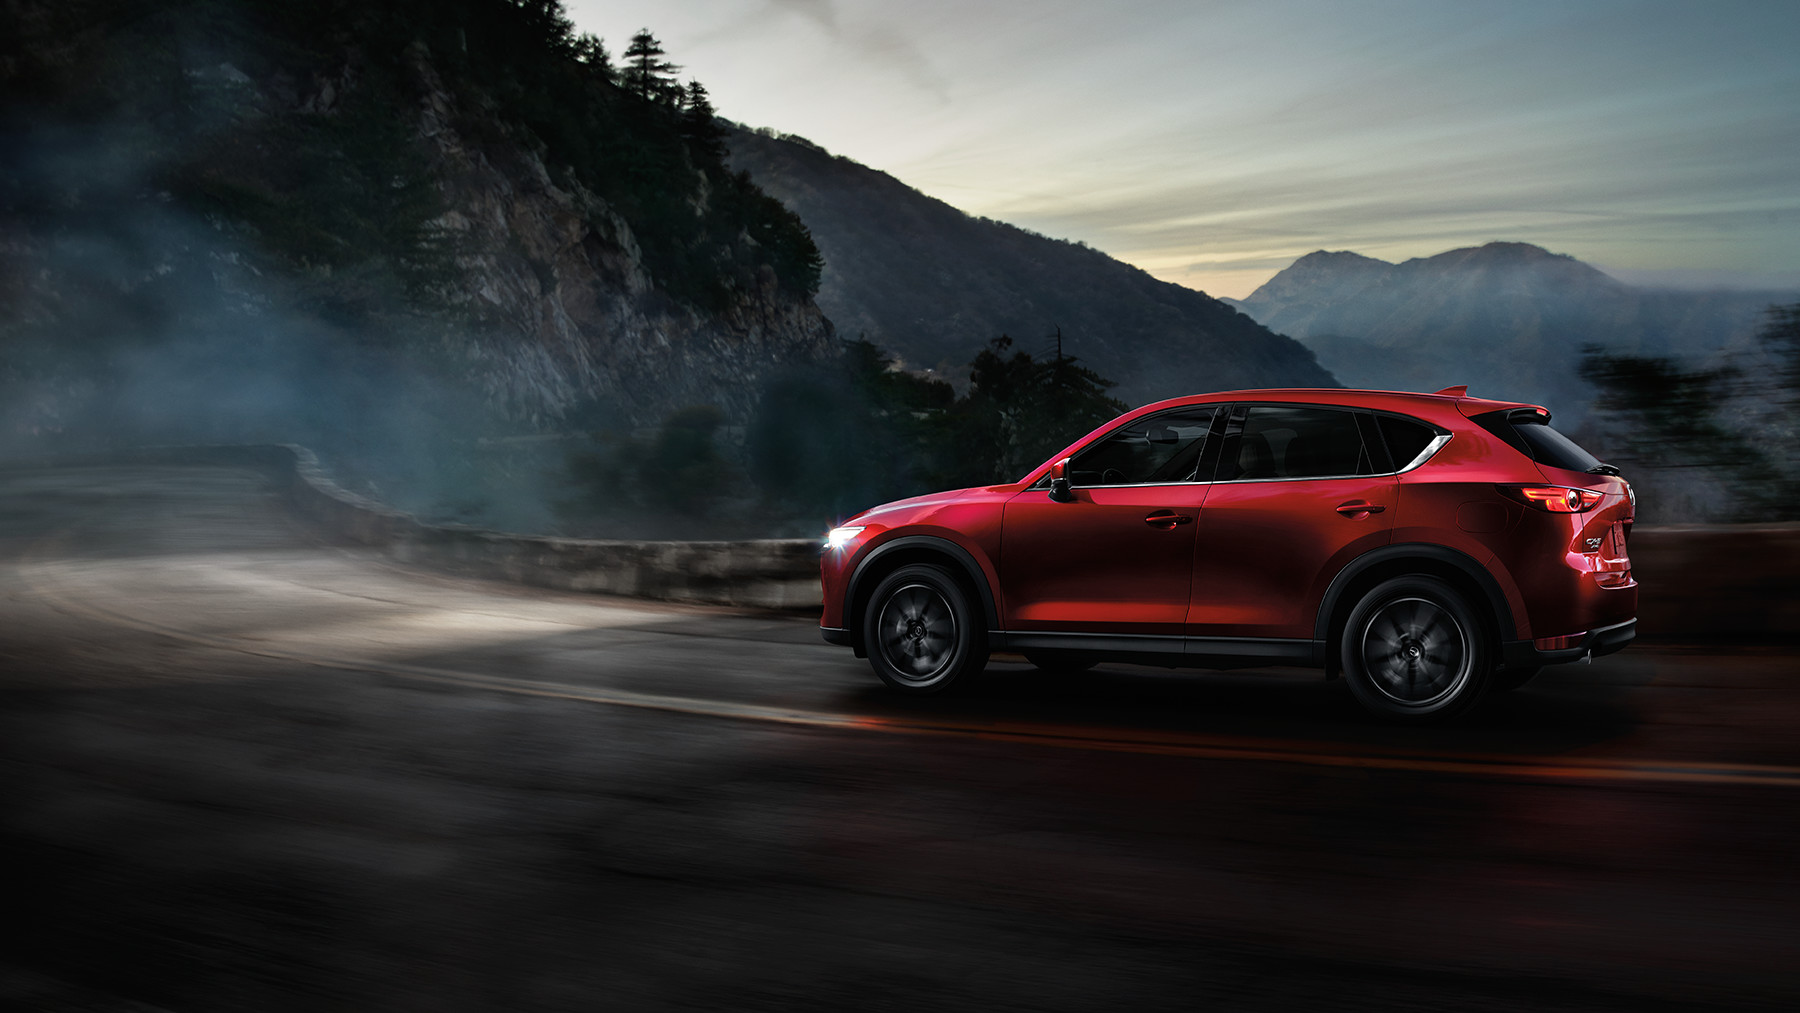 Mazda Cx In Night On Road Driving Mountains Background UHD